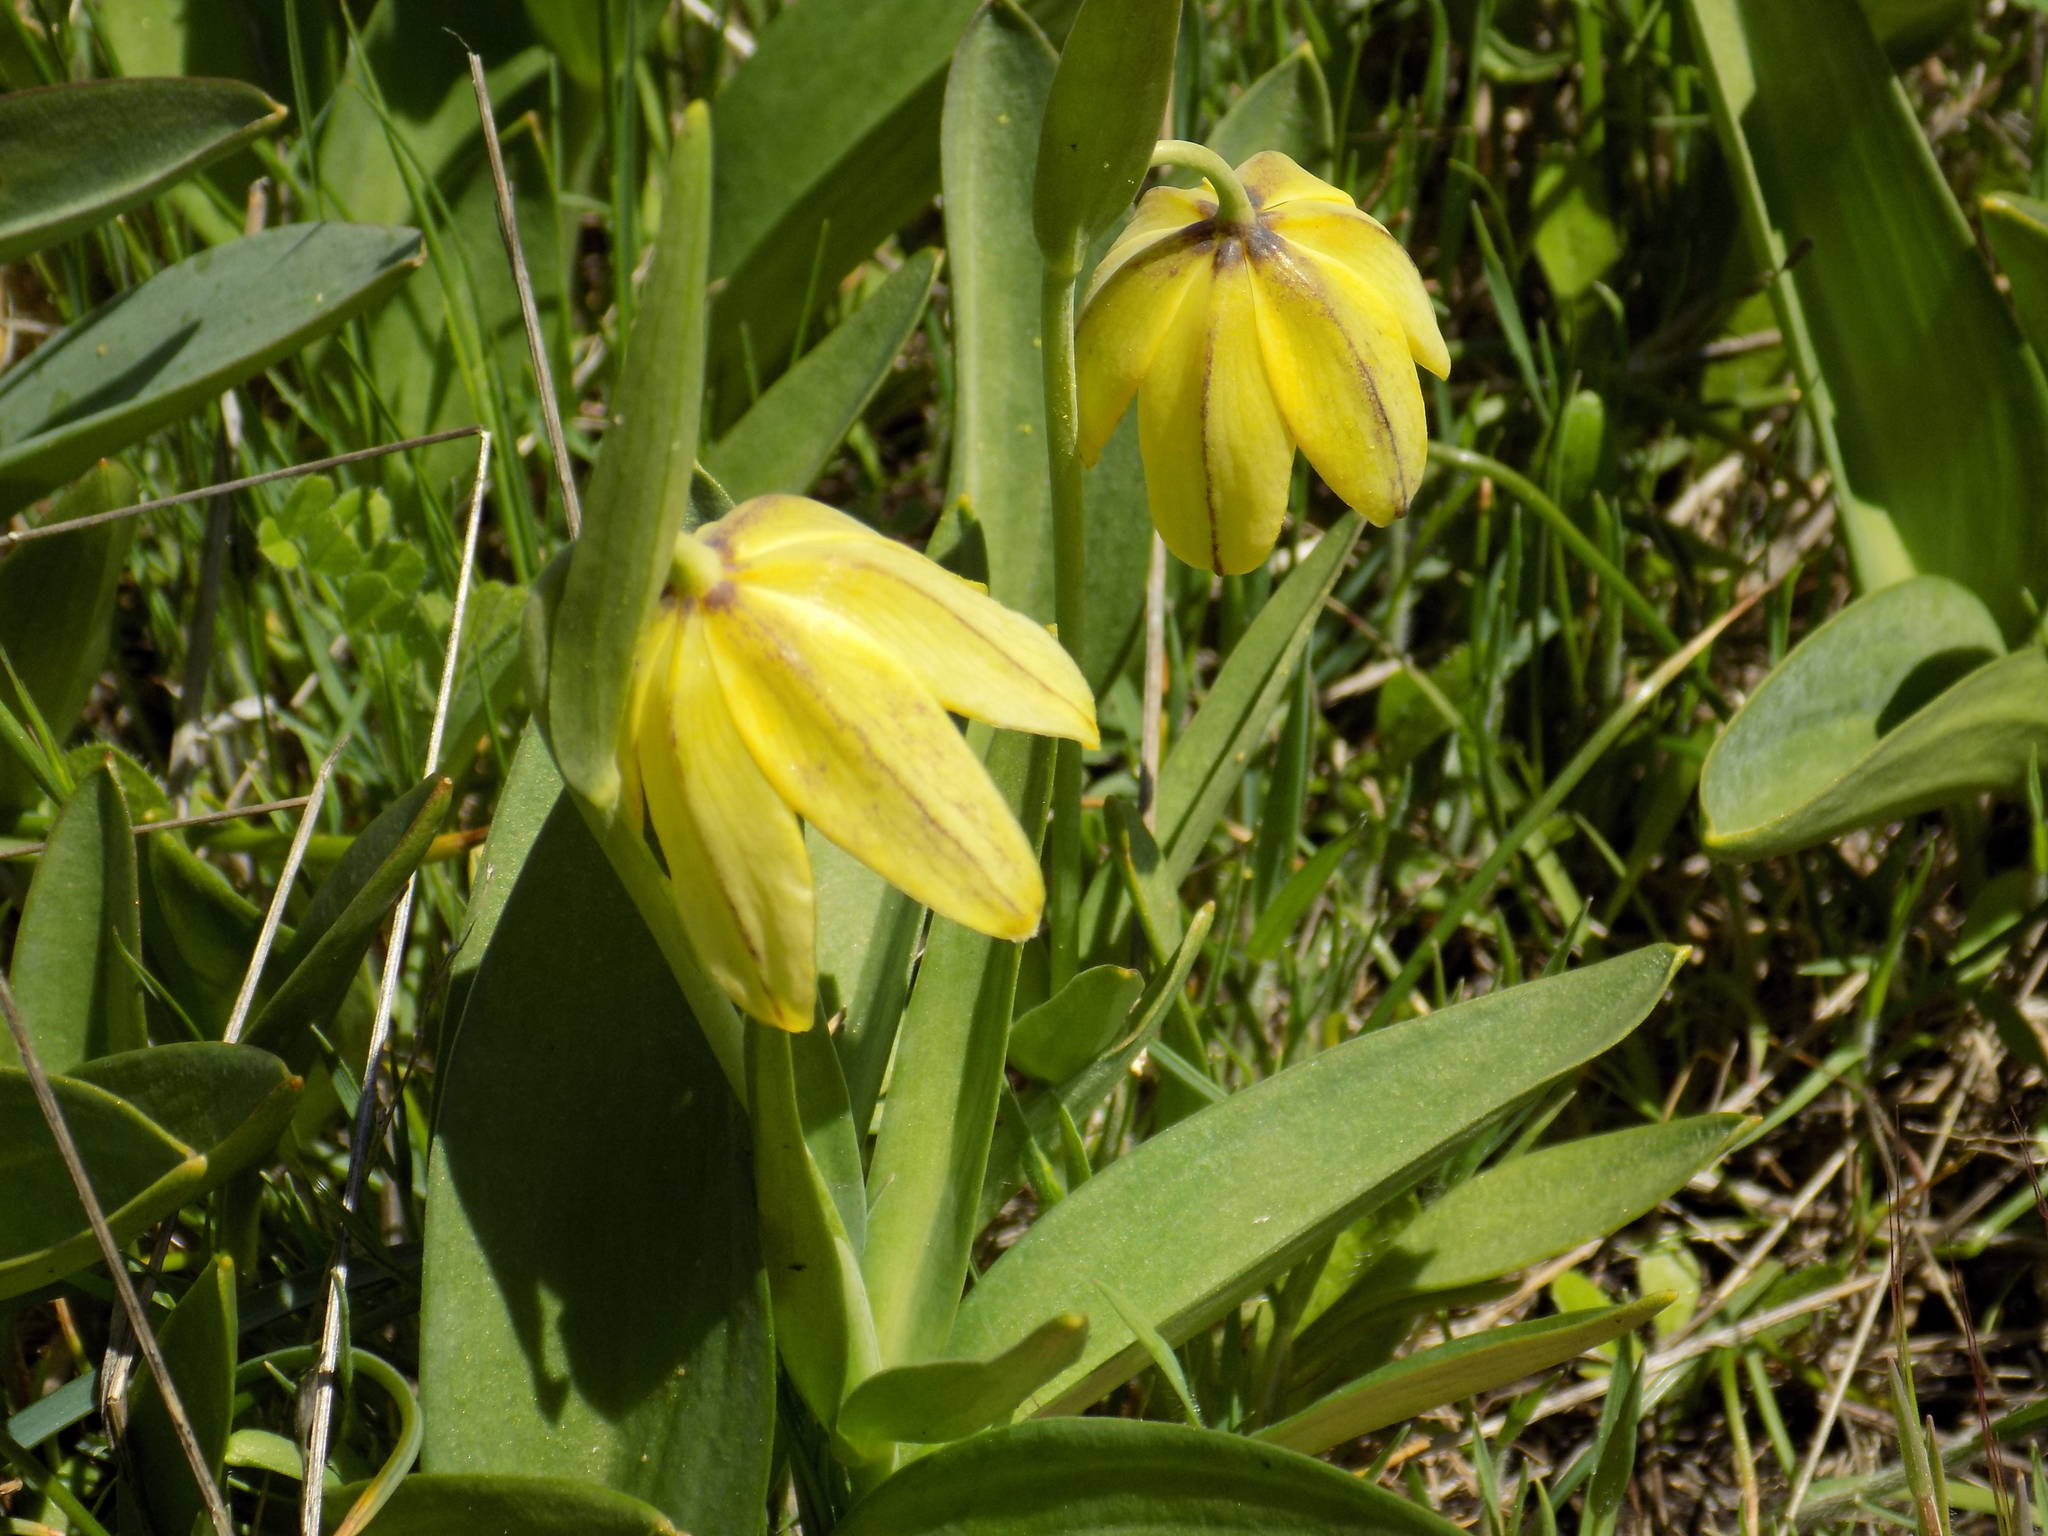 Contributed photo/Russel Barsh                                According to the Lopez nonprofit Kwiaht, Chocolate lilies, like the one photographed above, are eaten by Natives and have a pleasantly bitter taste when cooked. This rare yellow type is found at IcebergPoint.